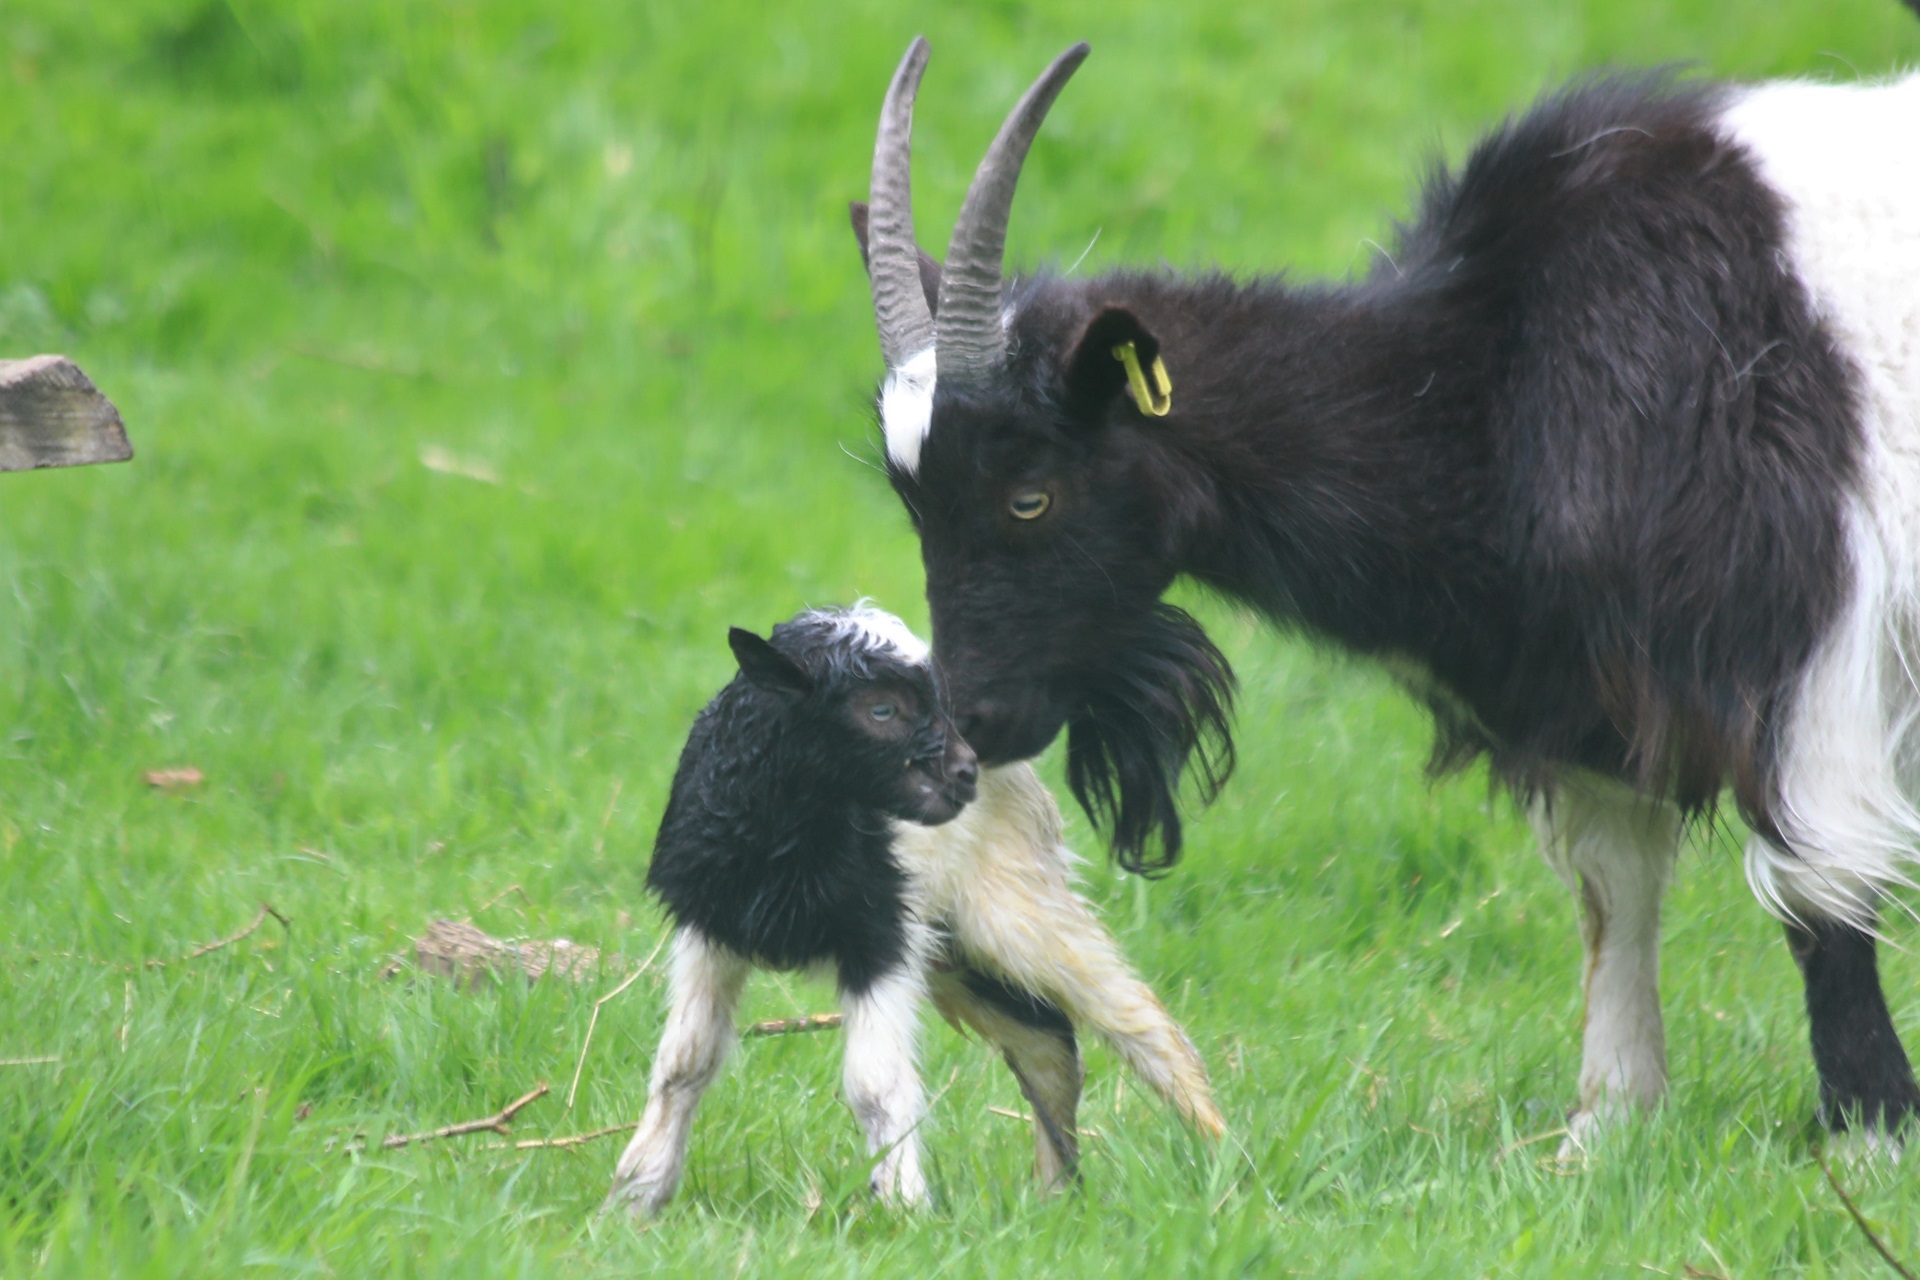 Bagot goat adult with baby IMAGE: Amy Middleton 2022